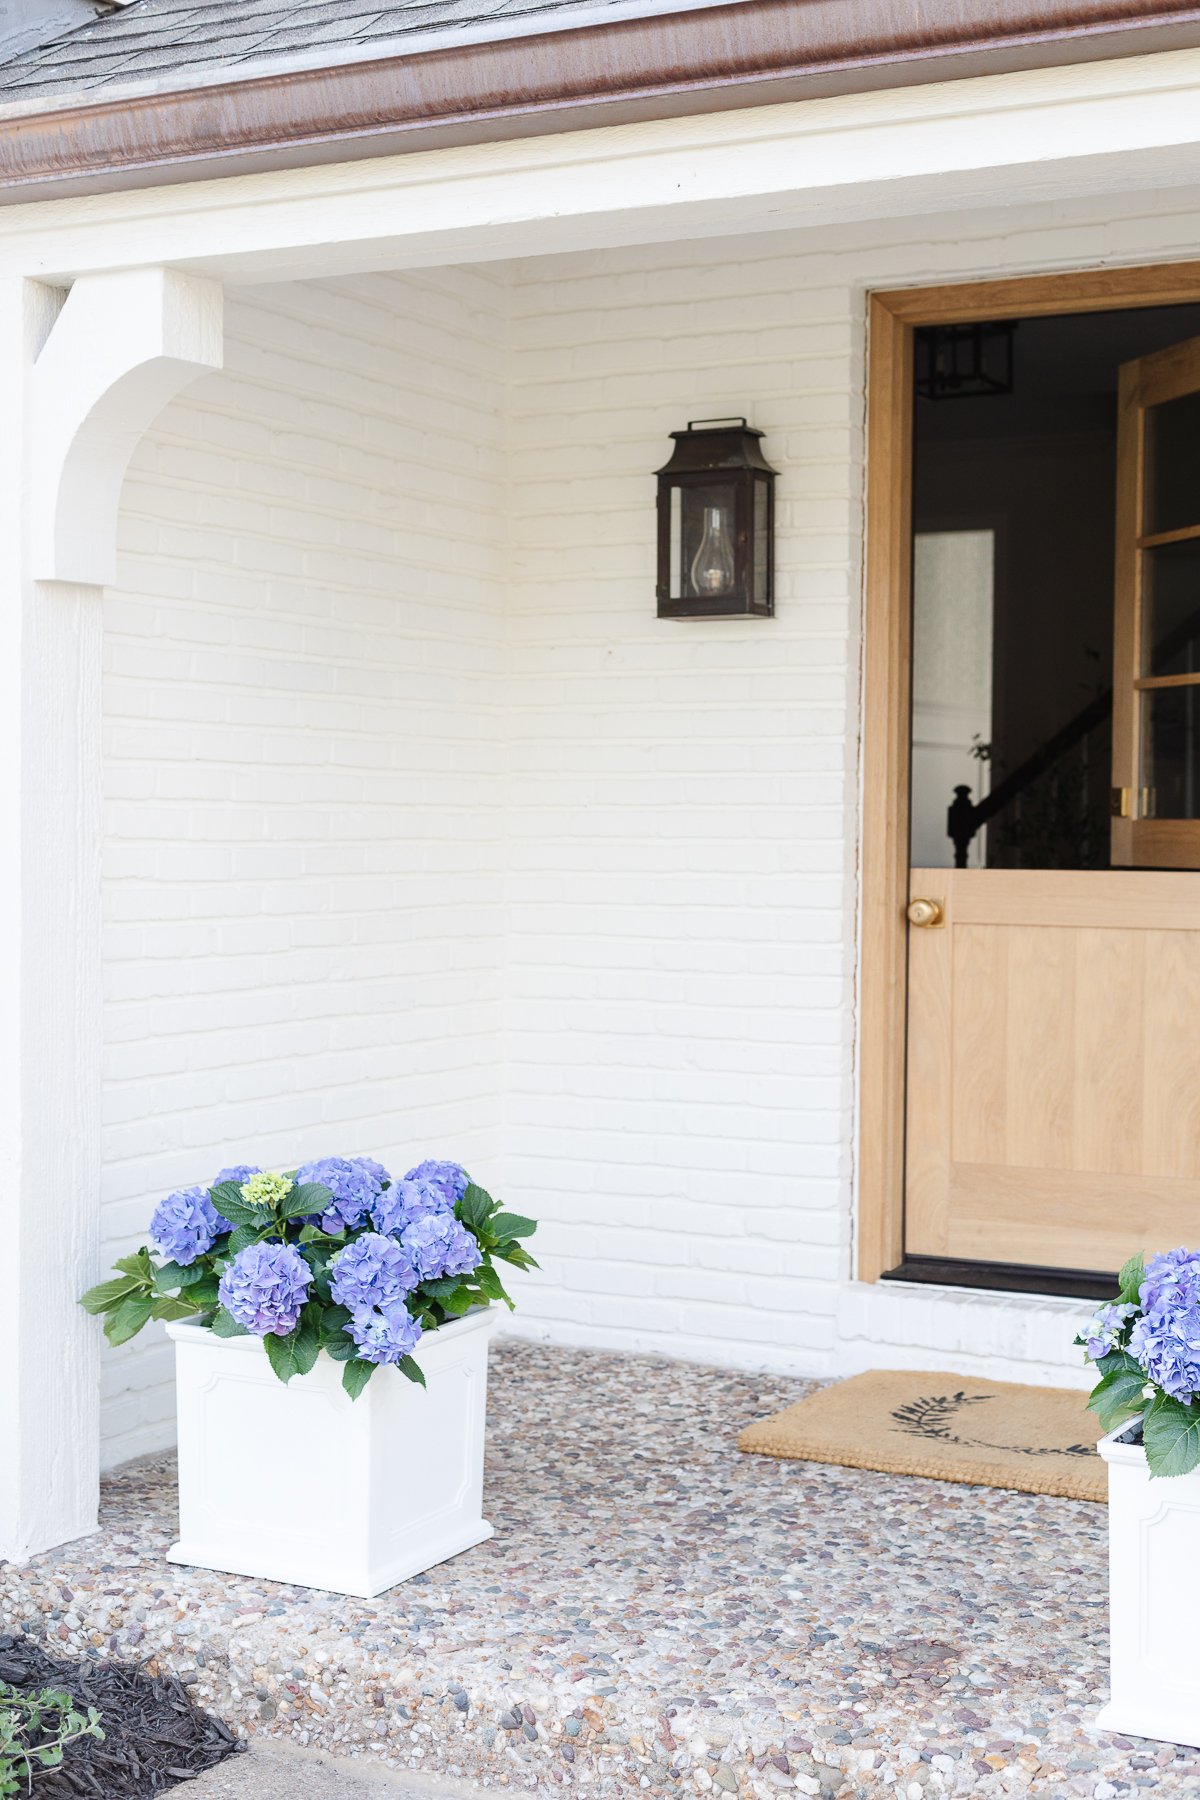 A front porch adorned with potted plants and a white door, painted in a white exterior paint colors.